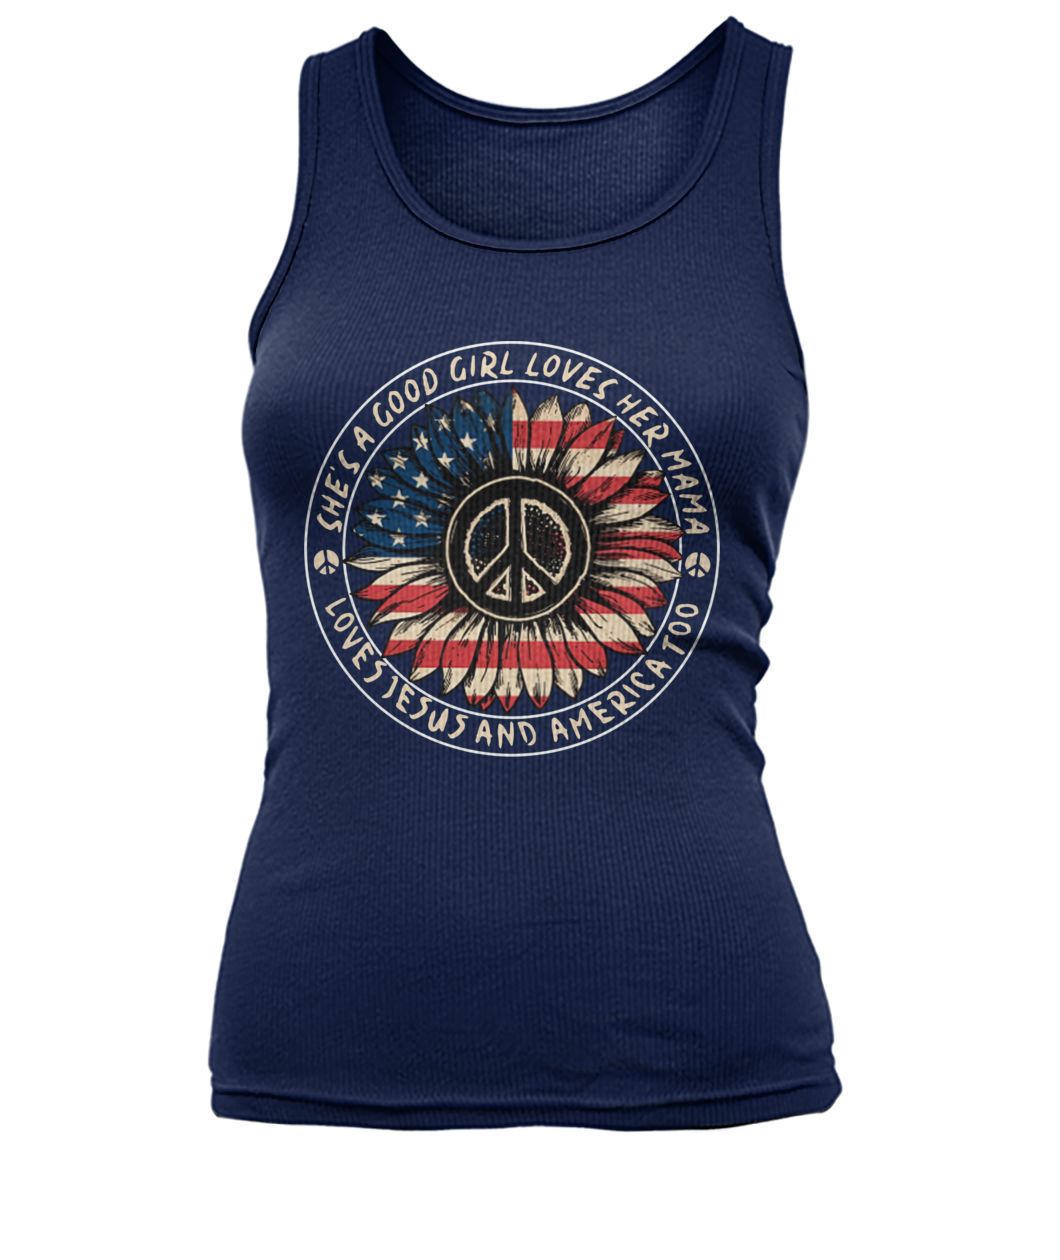 She’s a good girl loves her mama love jesus and america too america flag 4th of july women's tank top